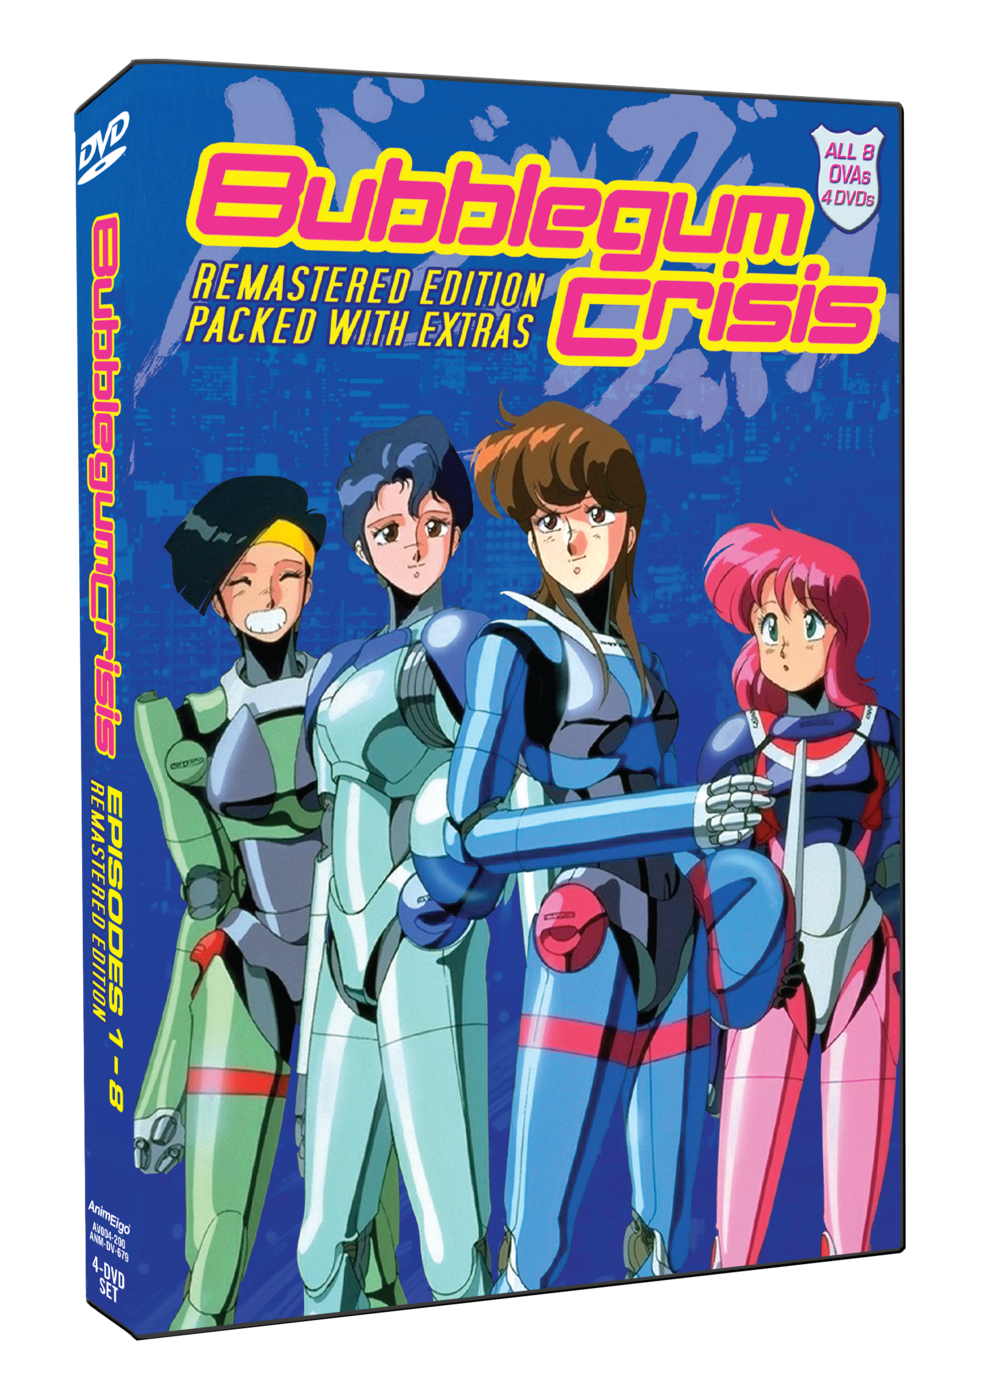 Limited edition comic Limited to 0) Another original anime DVD